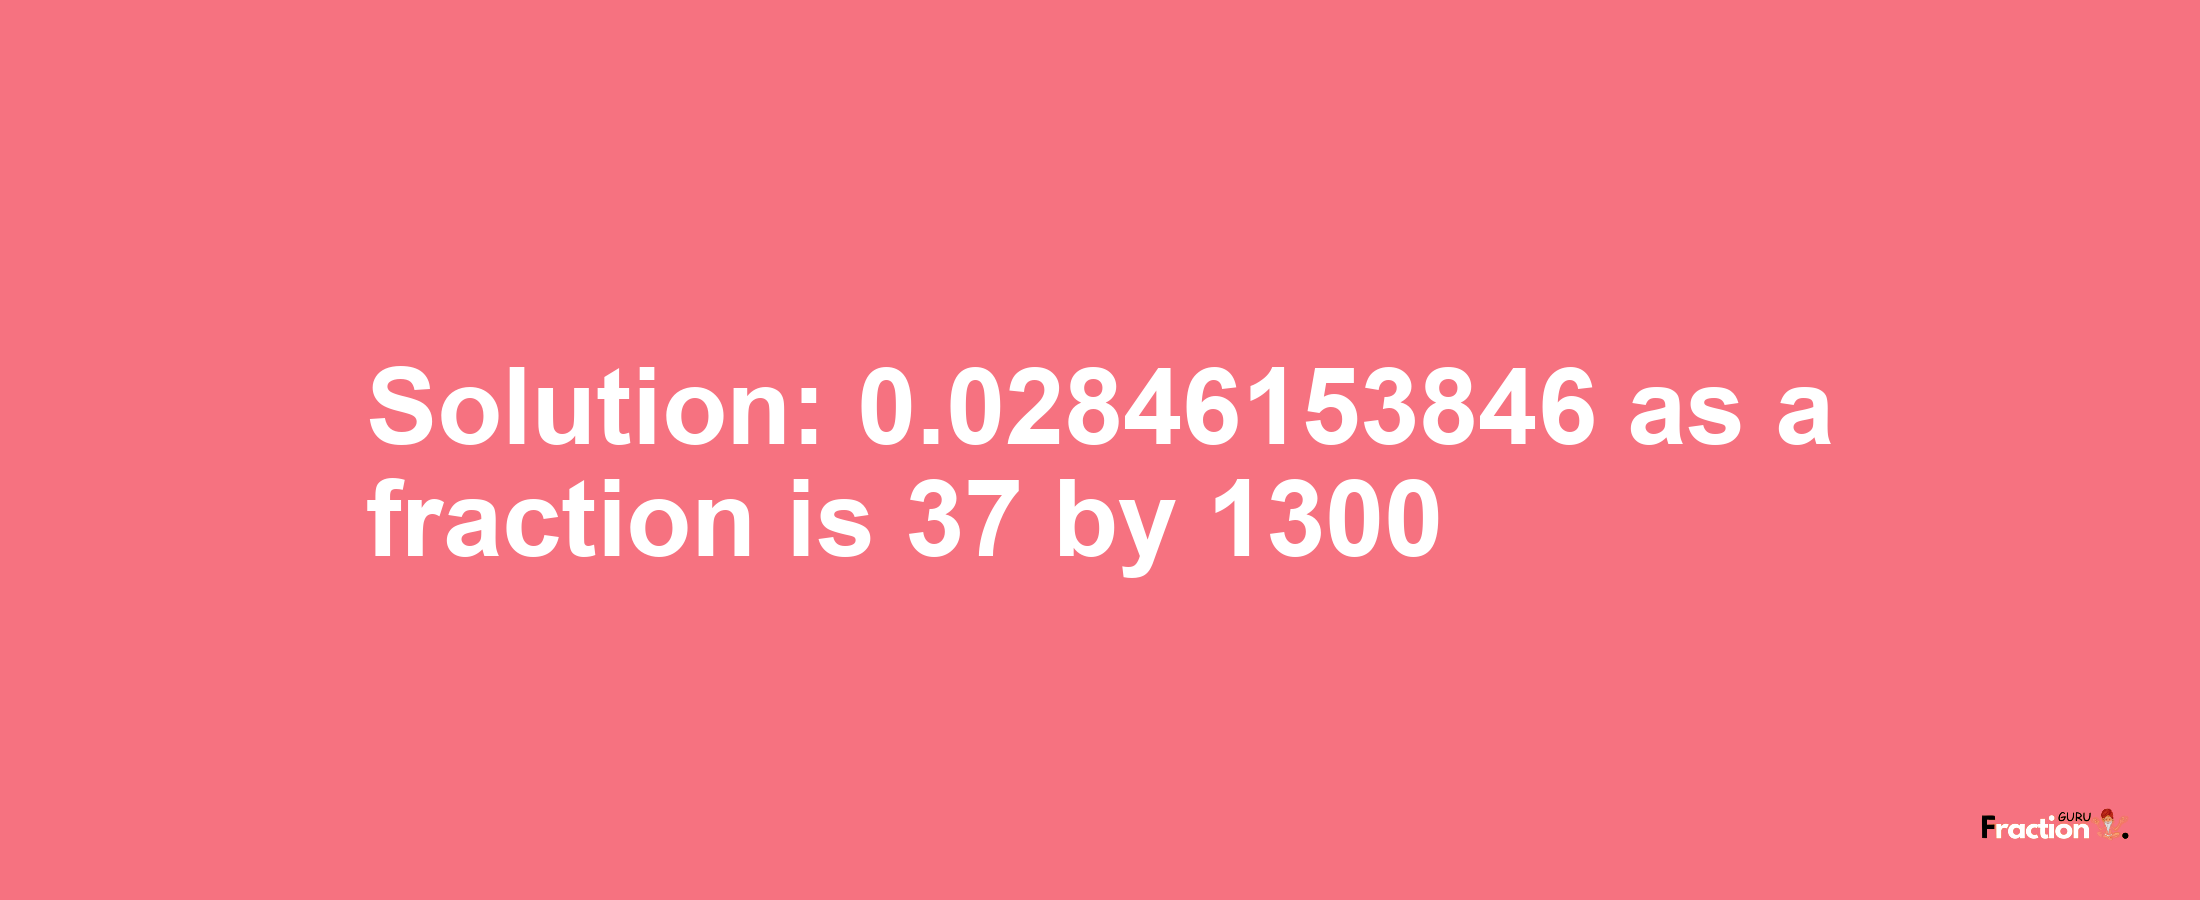 Solution:0.02846153846 as a fraction is 37/1300